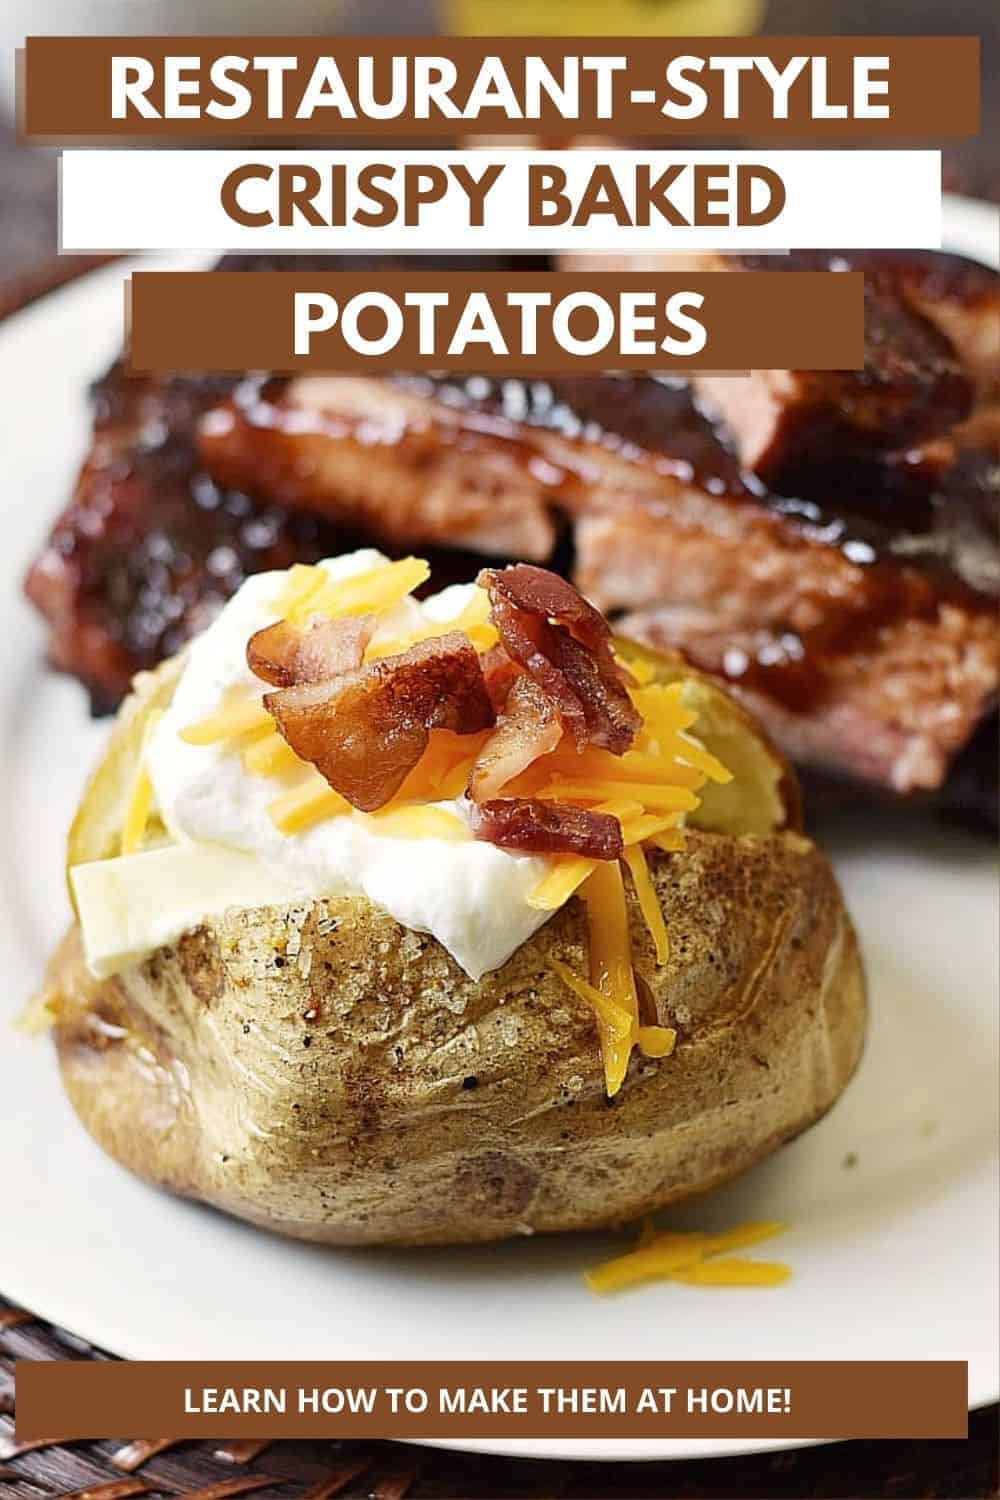 A baked potato topped with butter, sour cream, grated cheddar, and bacon chunks with a stack of barbecue ribs in the background and title graphic across the top.